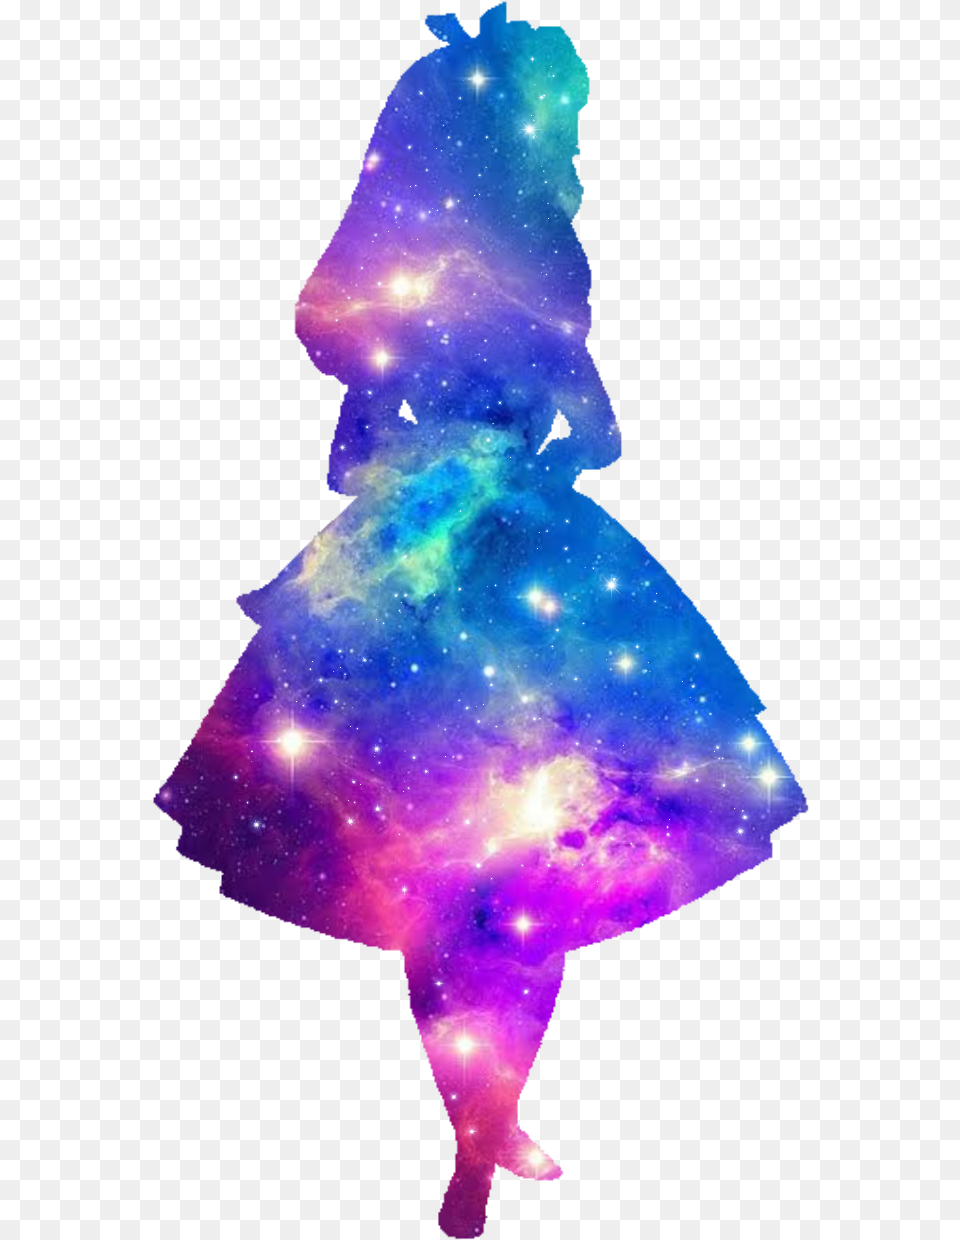 Alicia Galaxia Silueta Silhouette Galaxy Backgrounds For Phones, Purple, Mineral, Accessories, Nature Free Transparent Png